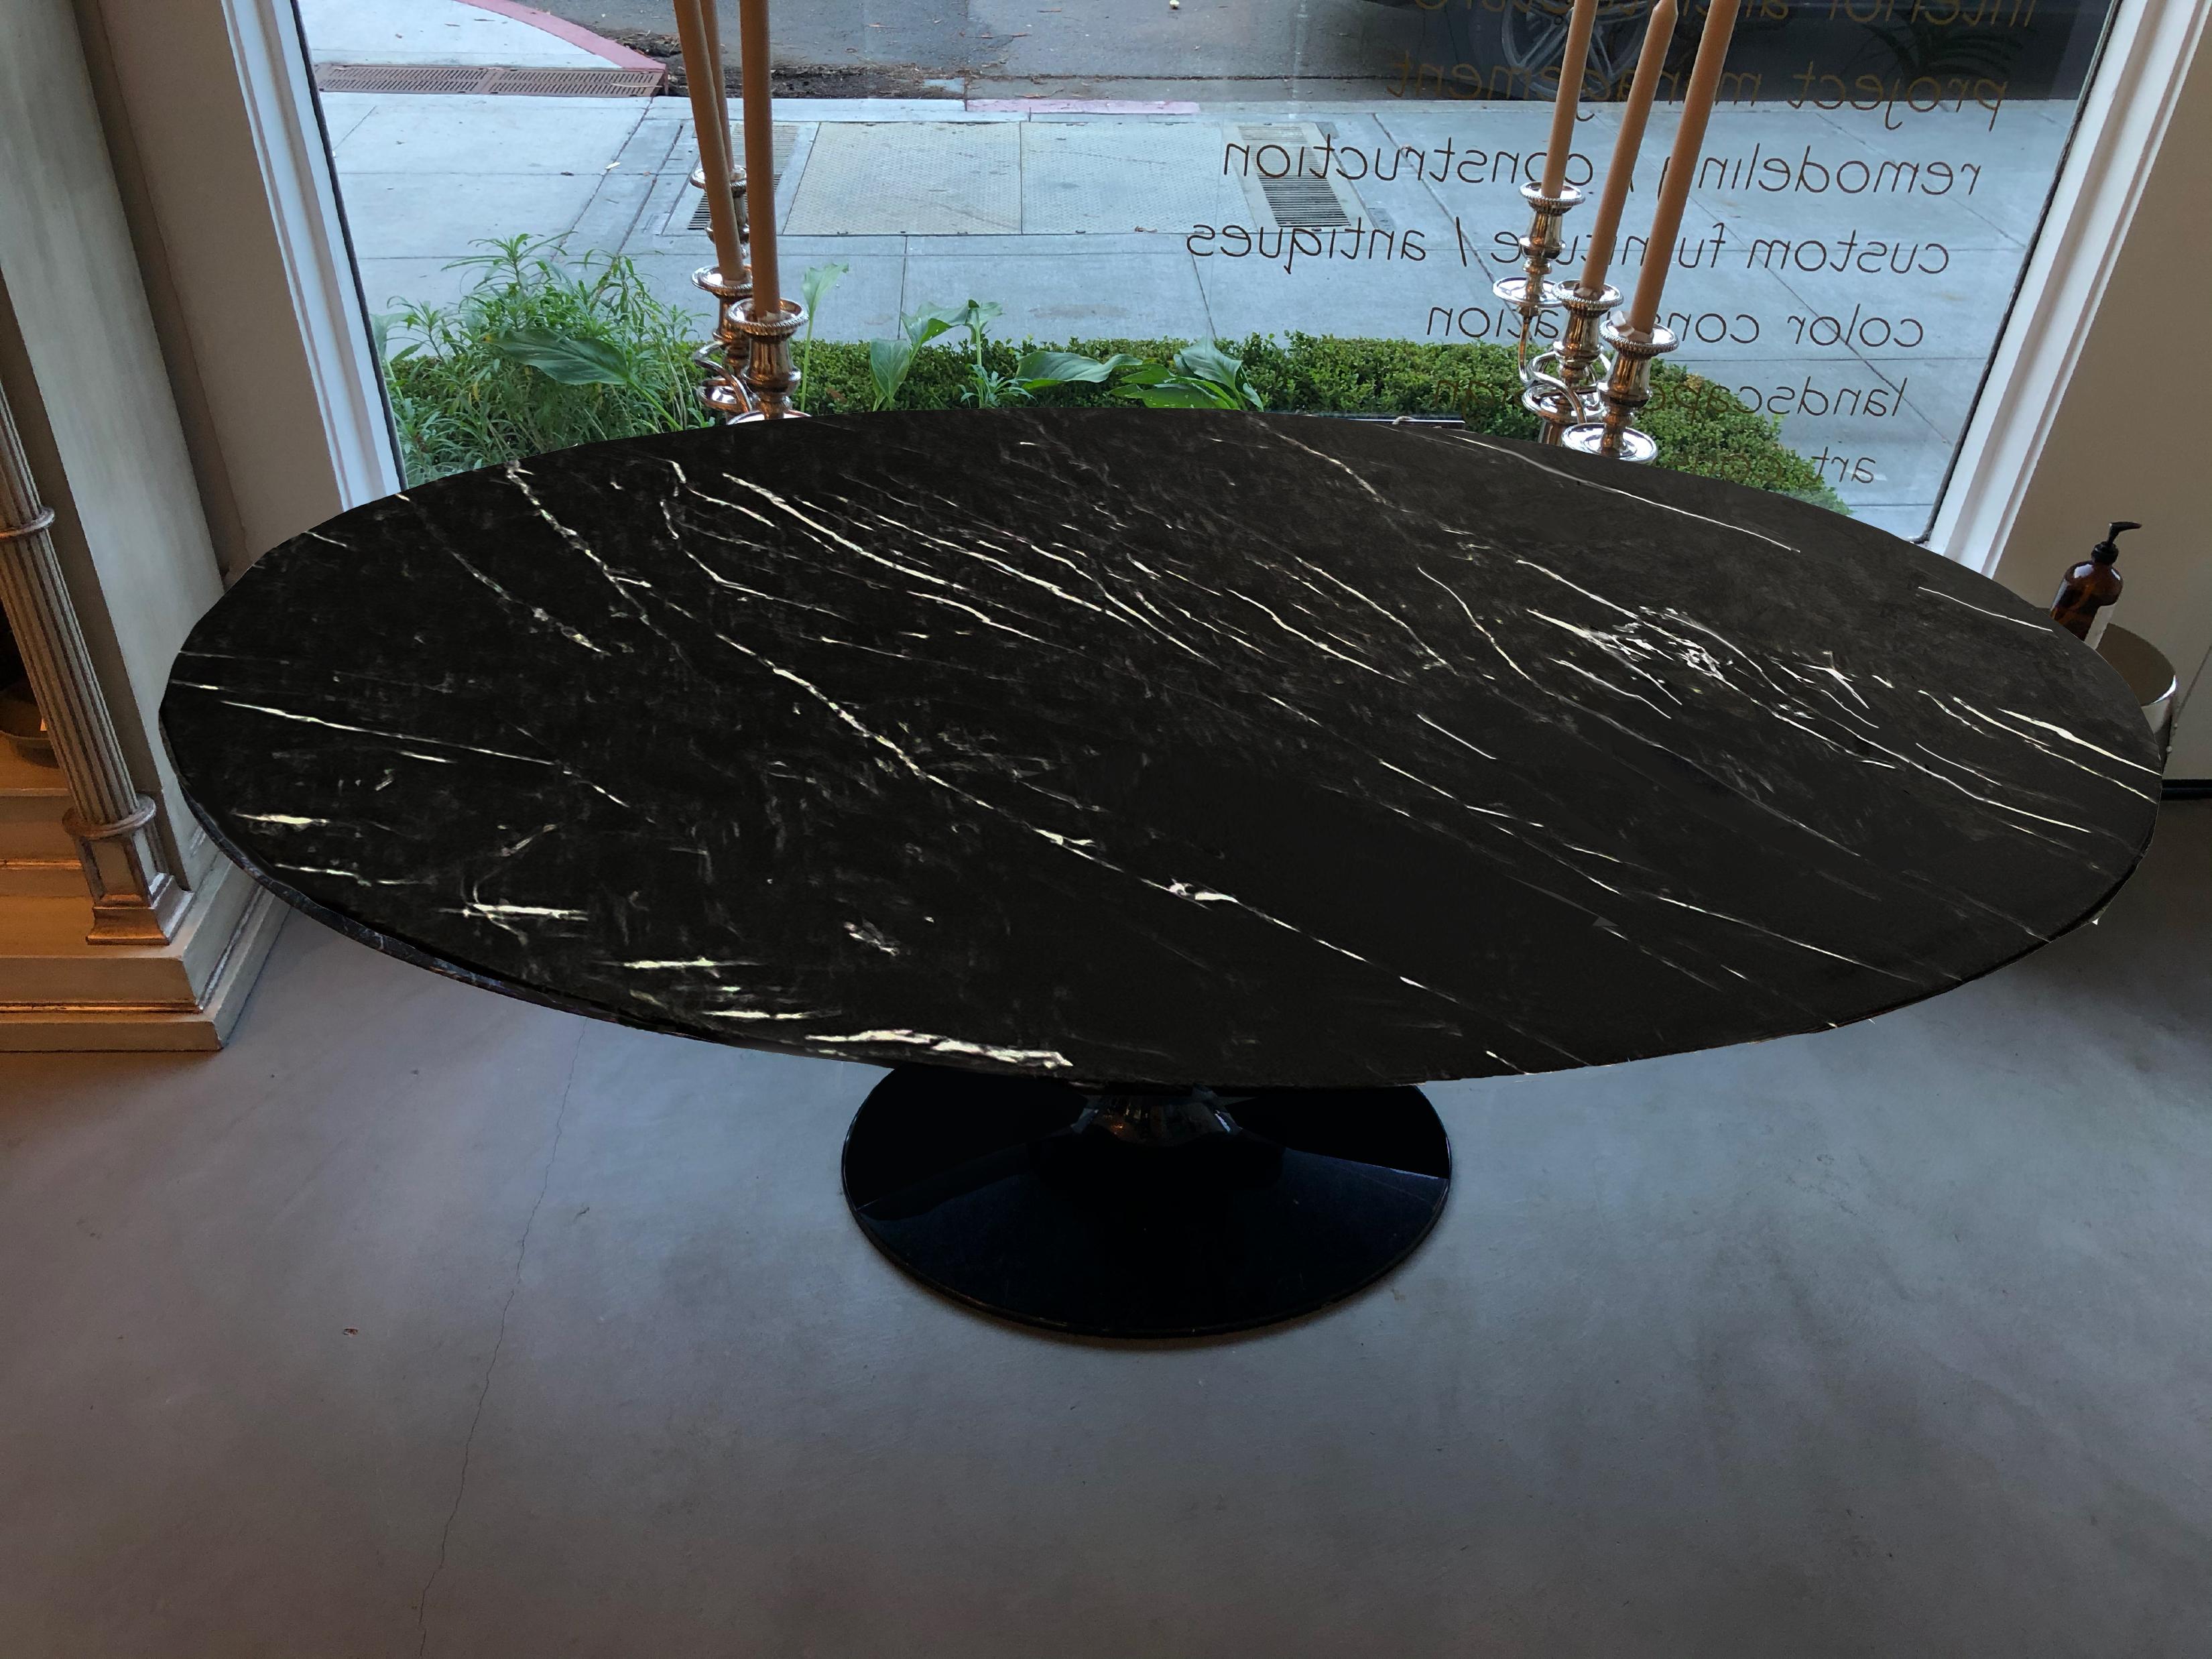 Mid-century authentic Saarinen Tulip oval dining table featuring an original black & white marble top and base.